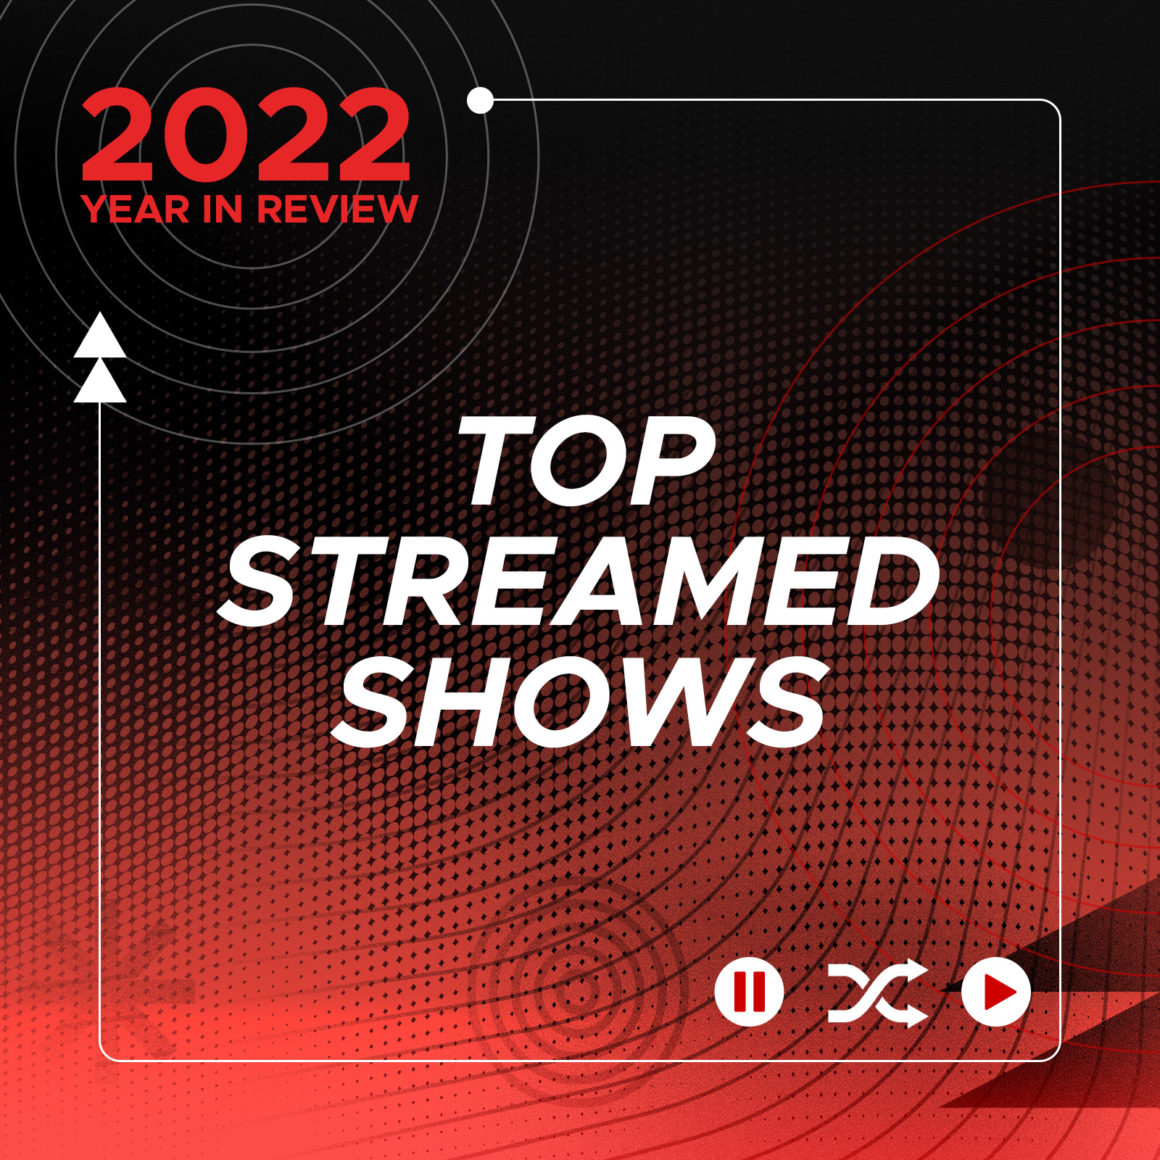 Top Streamed Shows of 2022